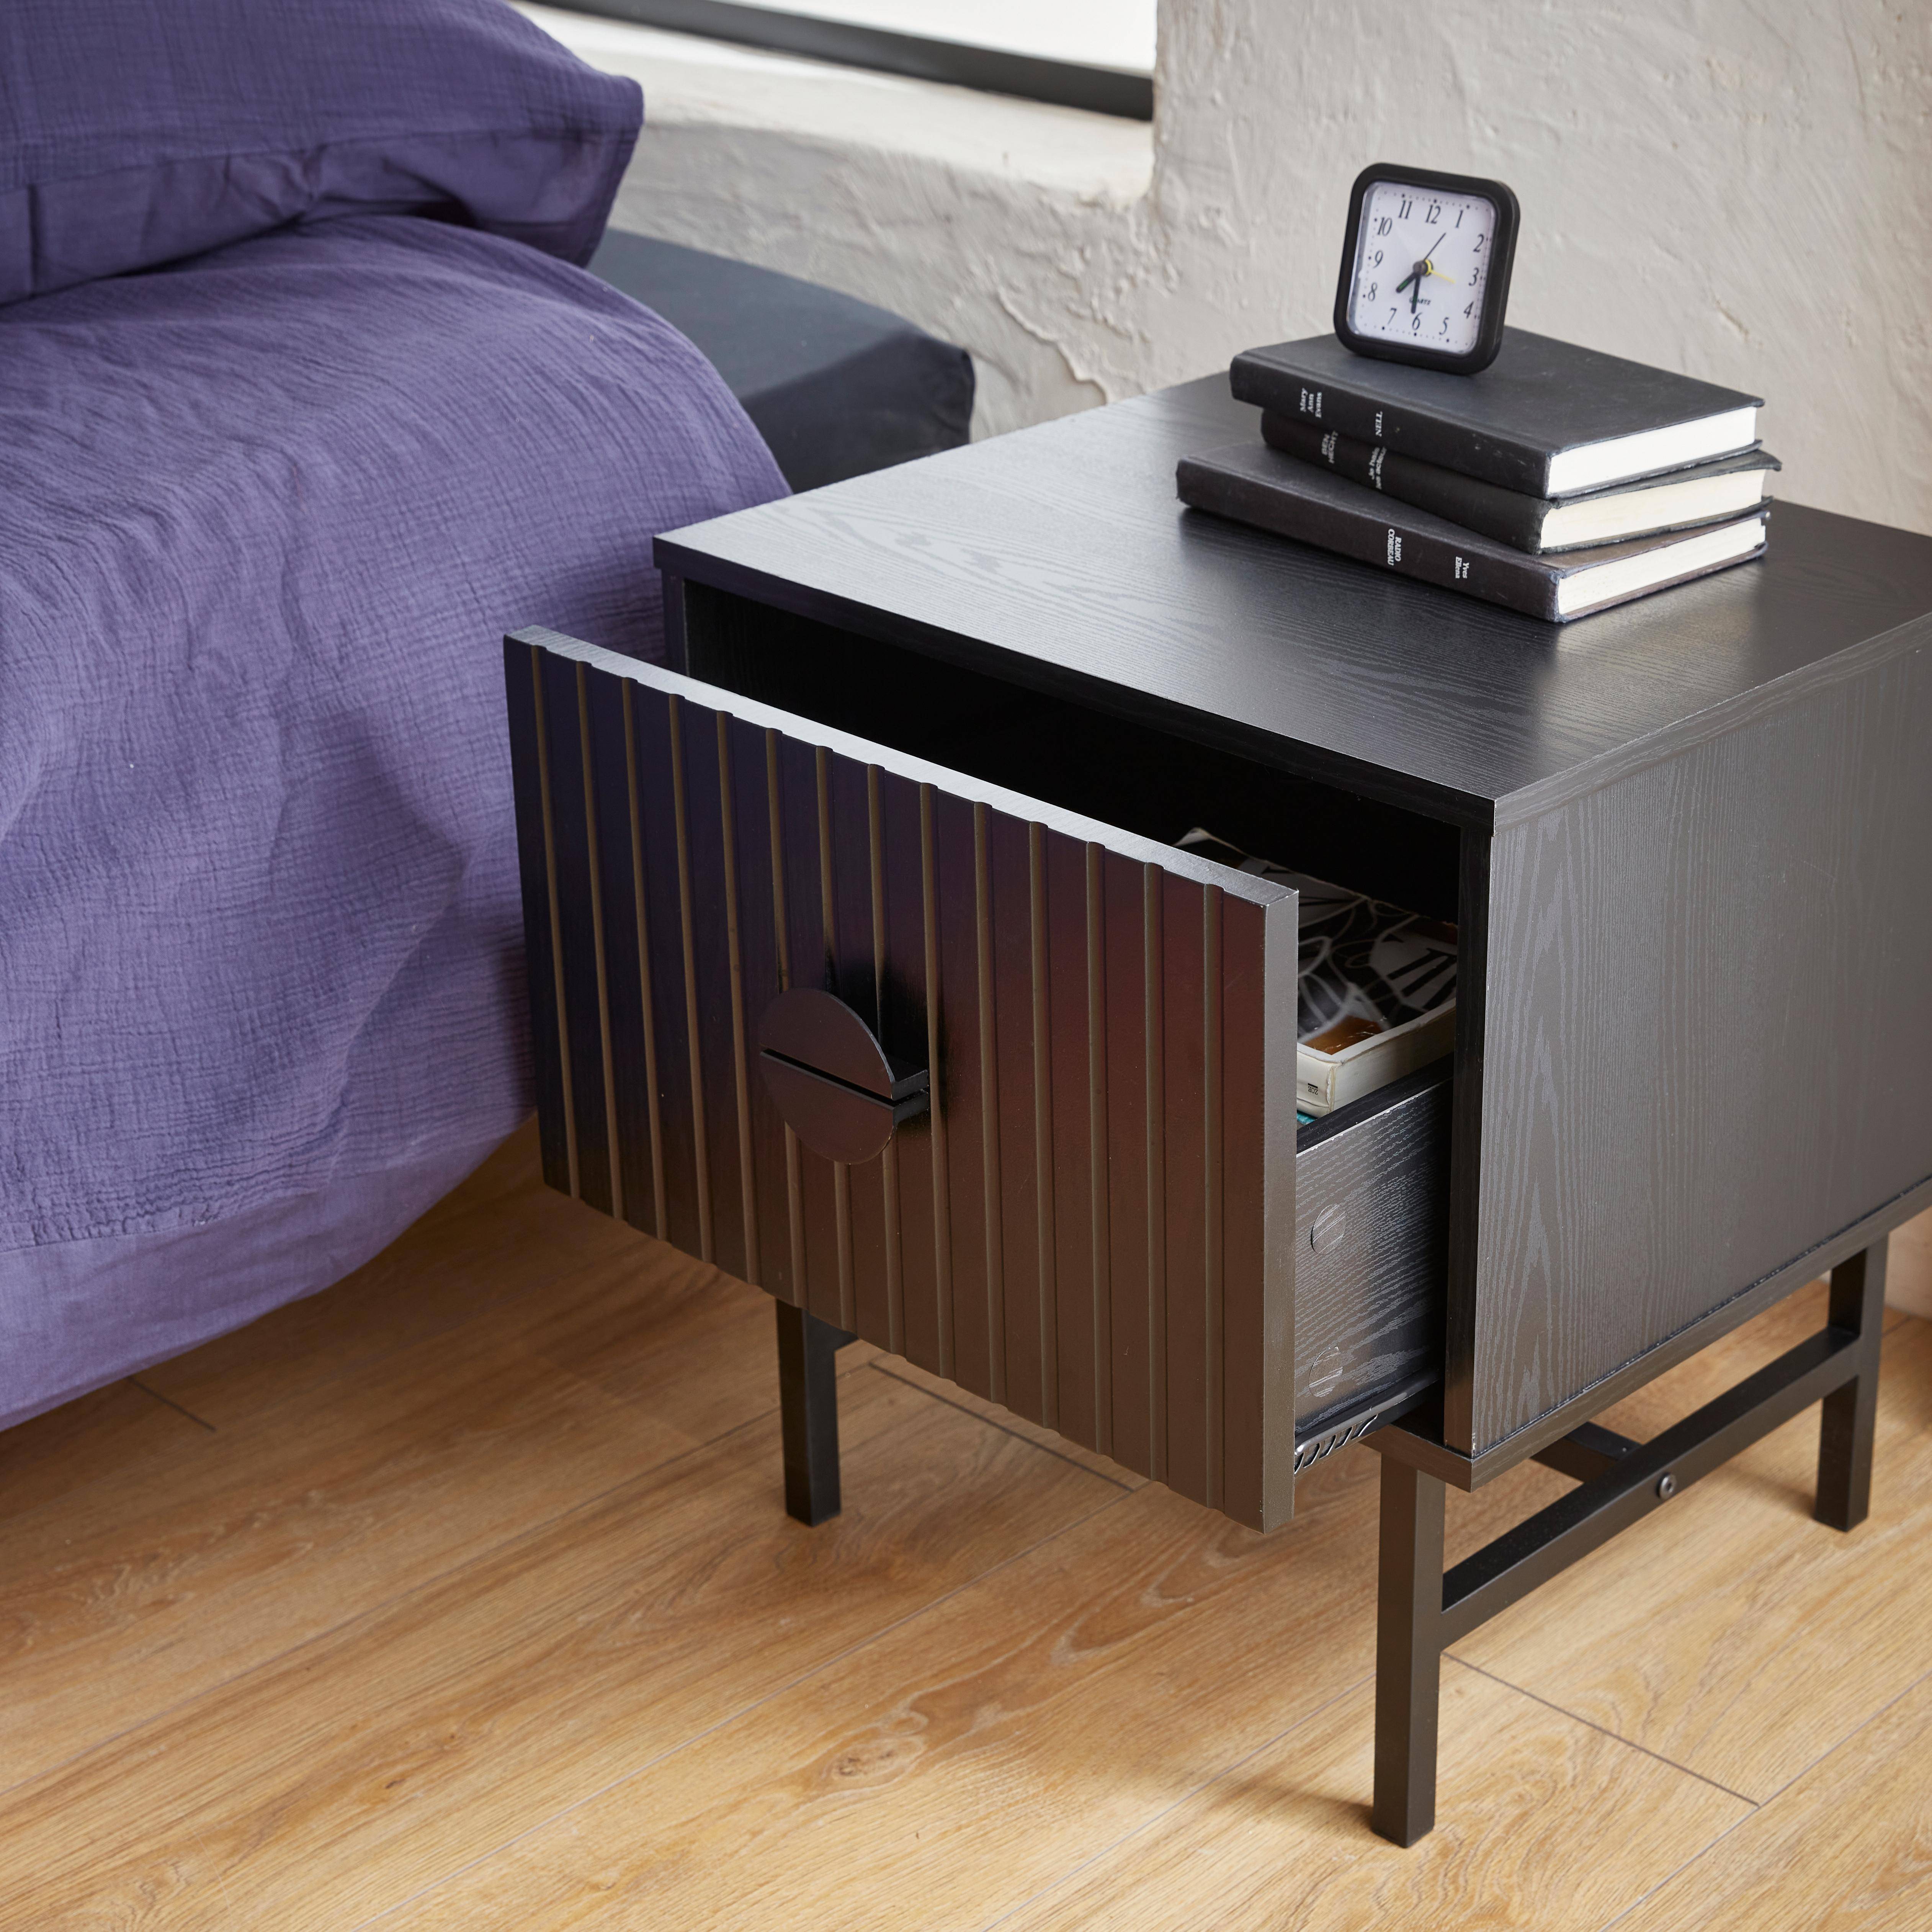 Bedside table with one drawer, ridged effect, industrial style, 48x39x50.3cm - Bazalt - Black Photo2